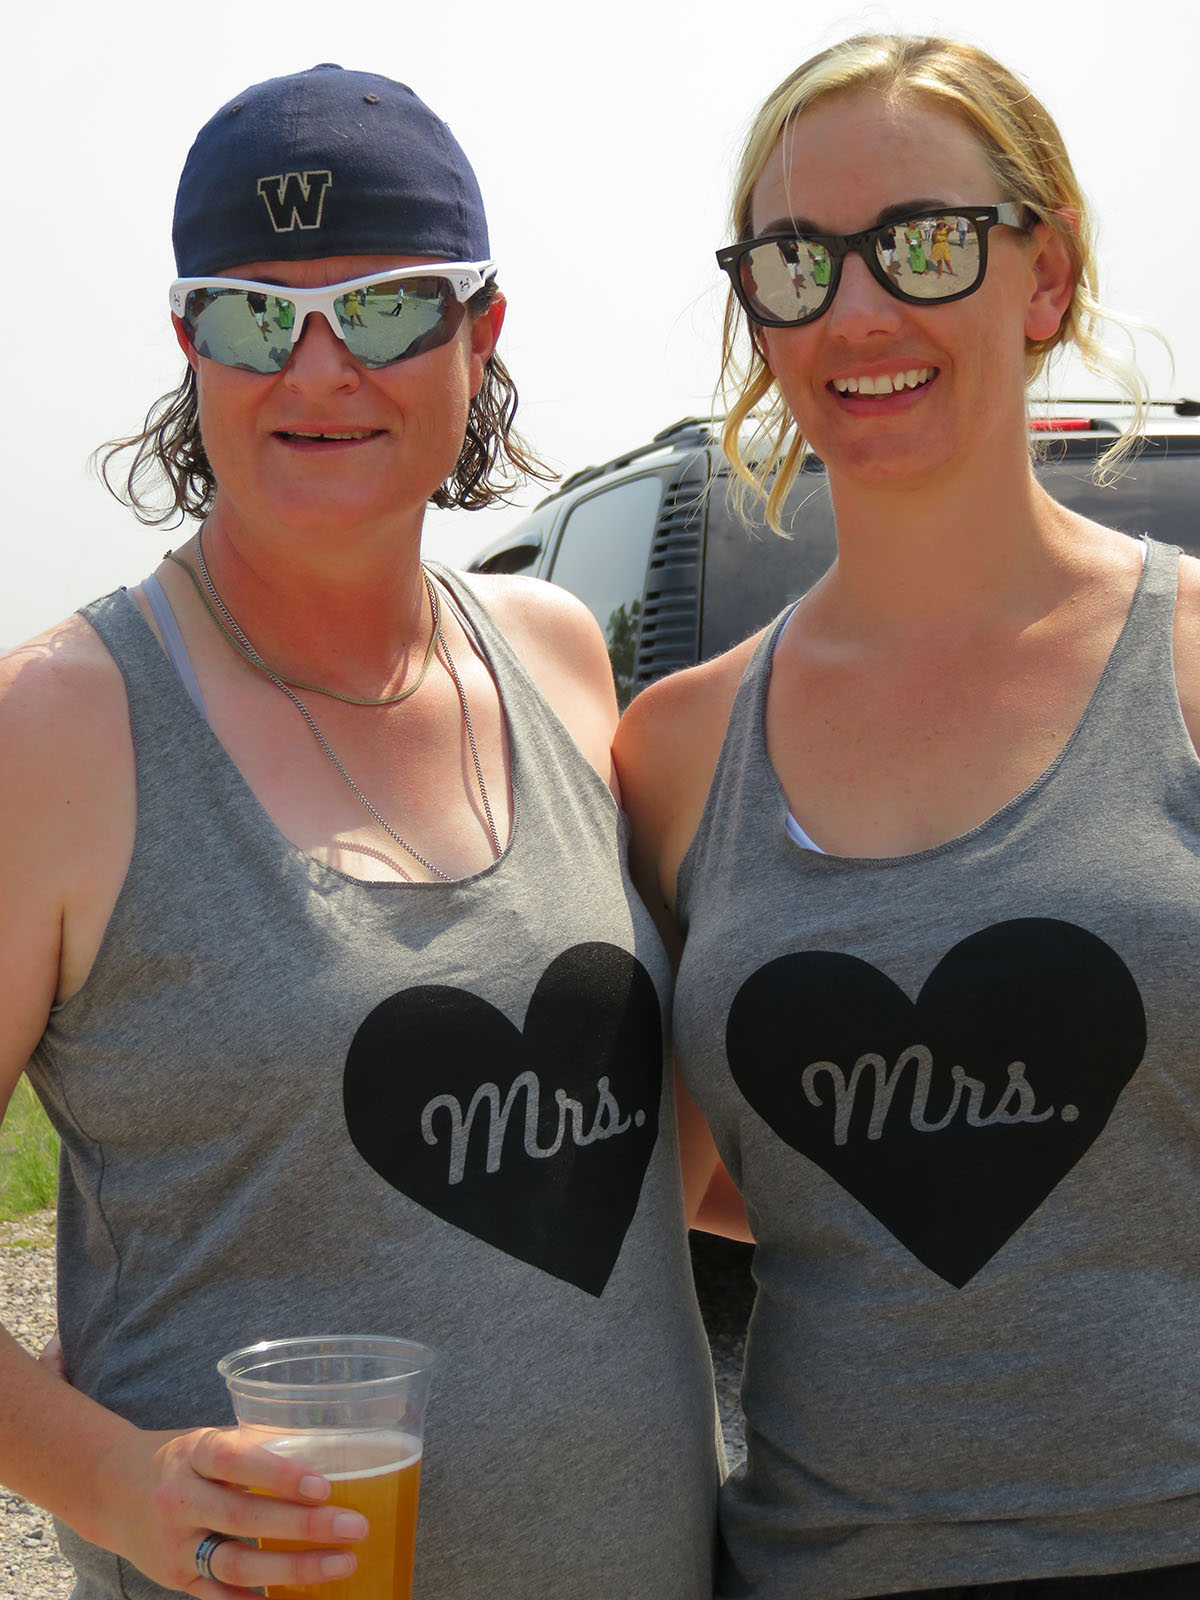 Rustic castle wedding at Guernsey State Park in Wyoming lesbian two brides Mrs. Mrs. tank tops